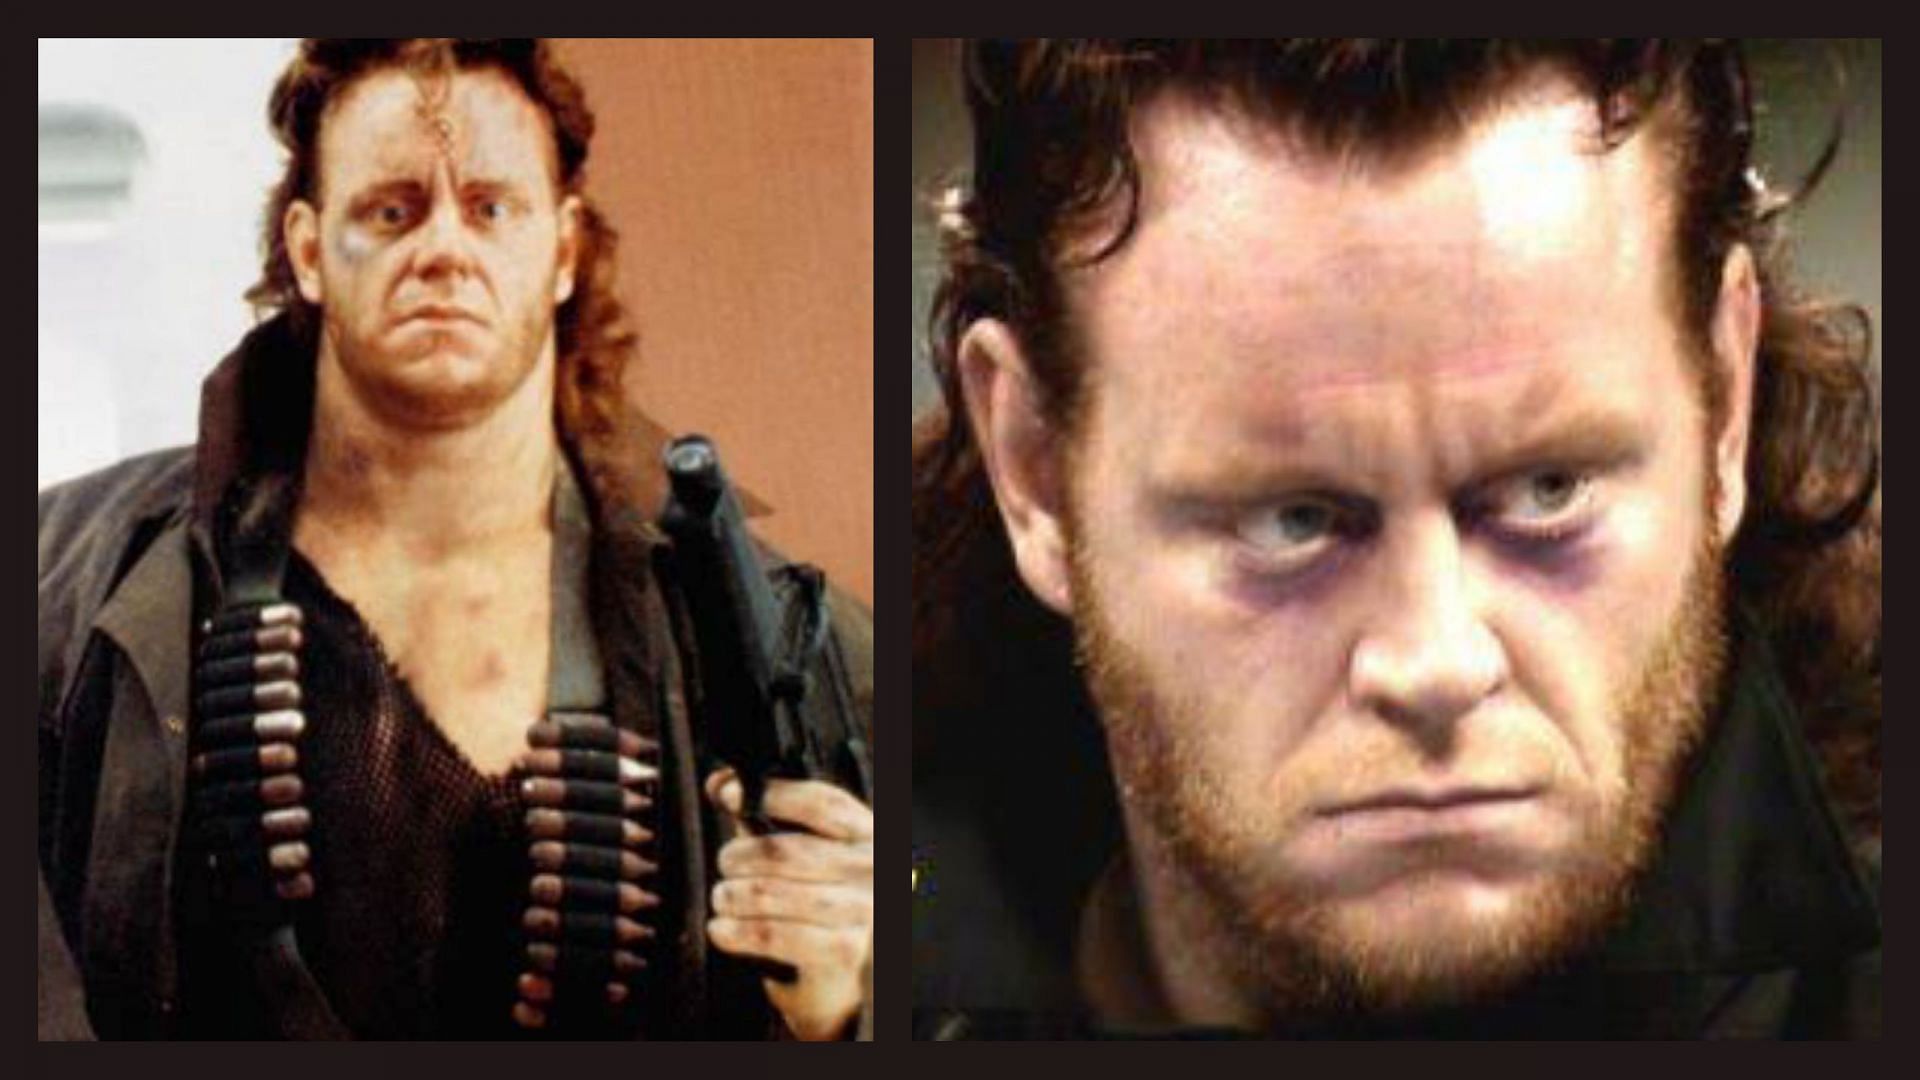 Has The Undertaker been a part of movies?